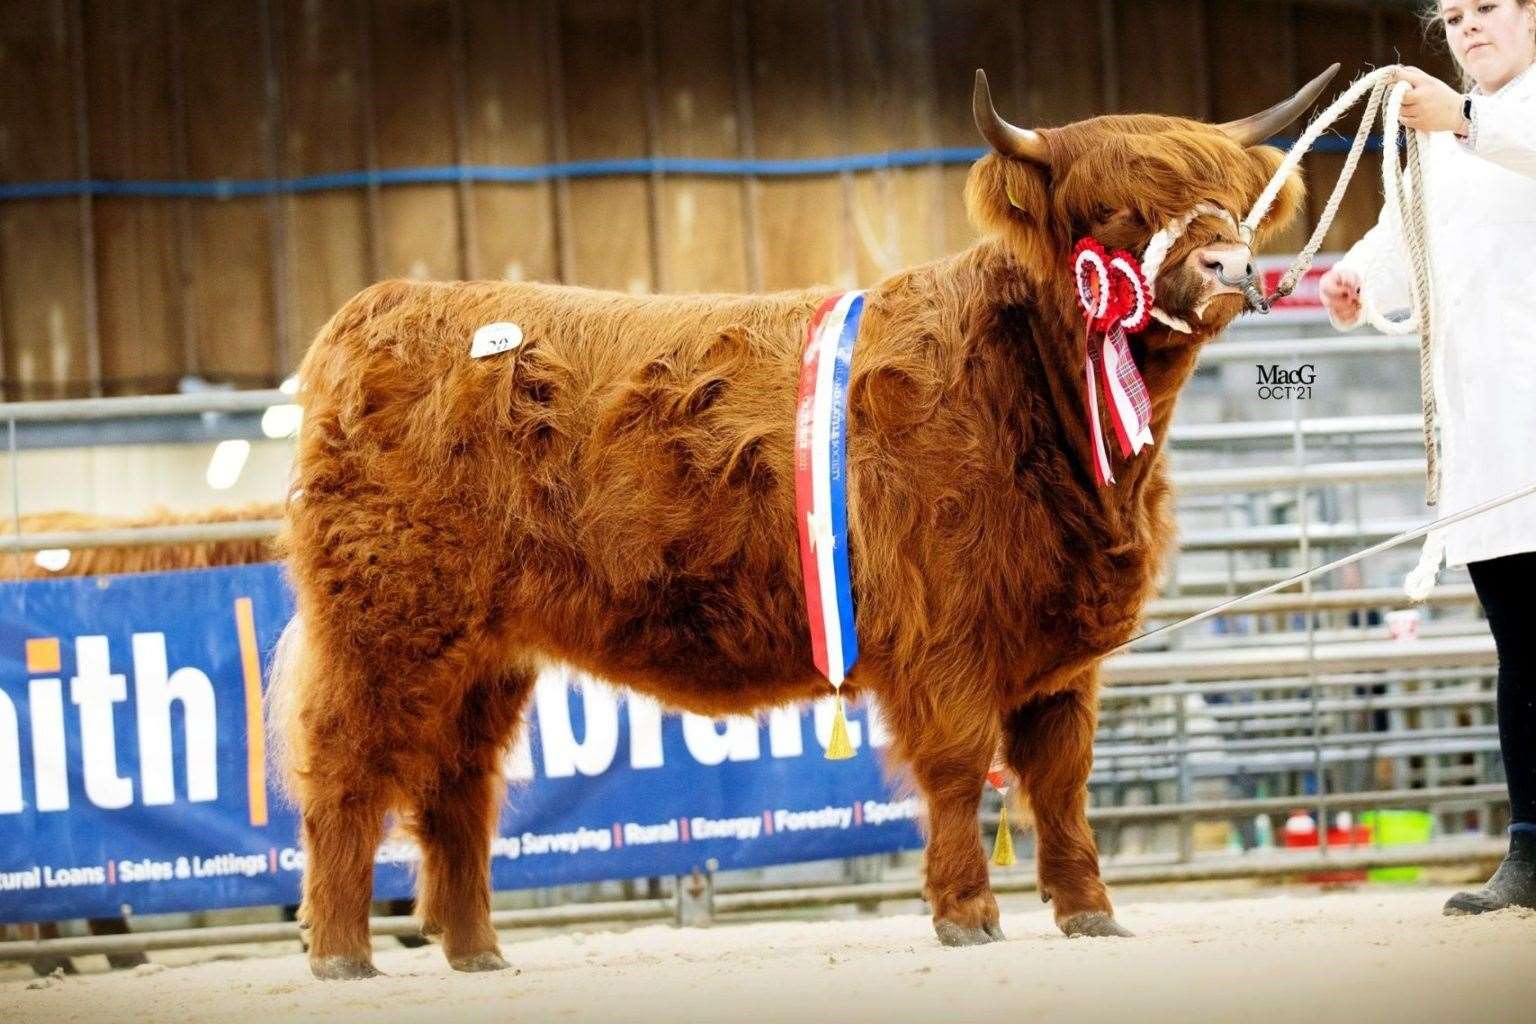 The Culfoich herd will participate at the National Show which takes place in Turriff.